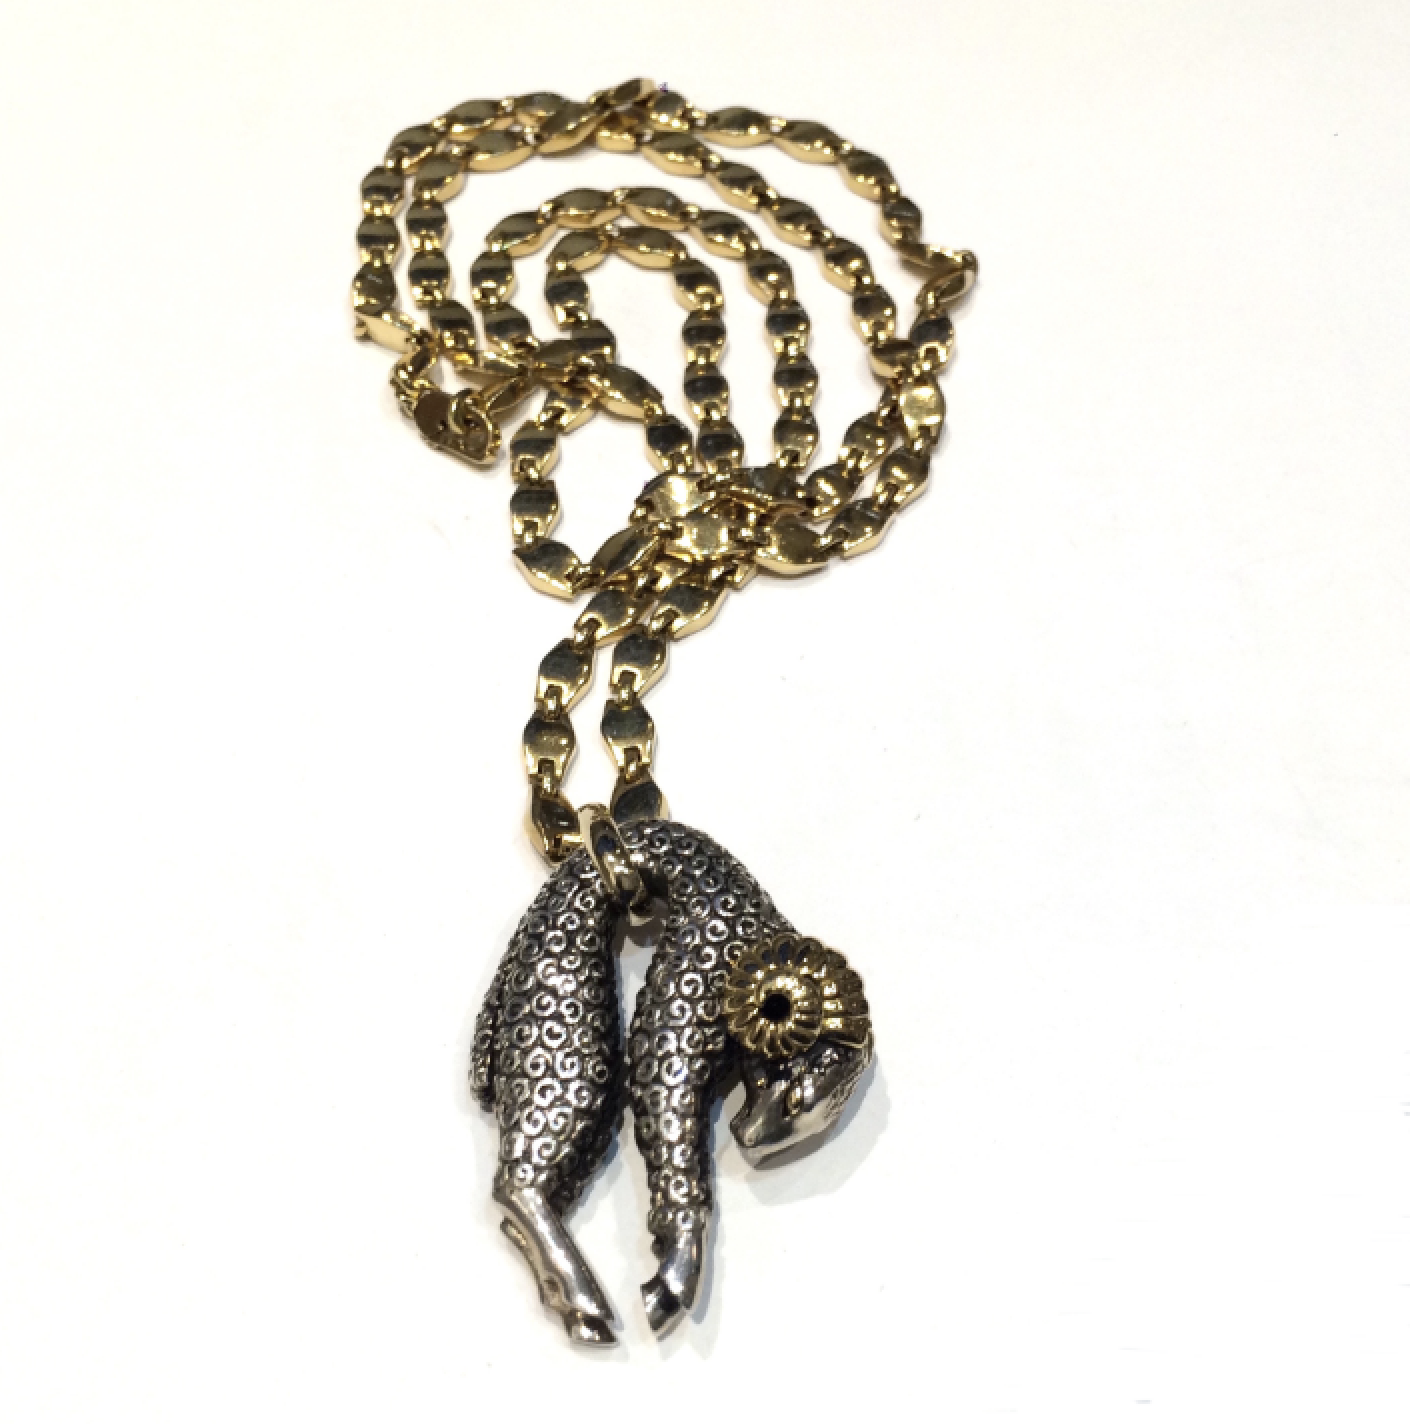 Cartier “Order of the Golden Fleece” pendant necklace with an 18K gold and silver ram, matching Cartier 18K gold chain, signed, c. 1970’s